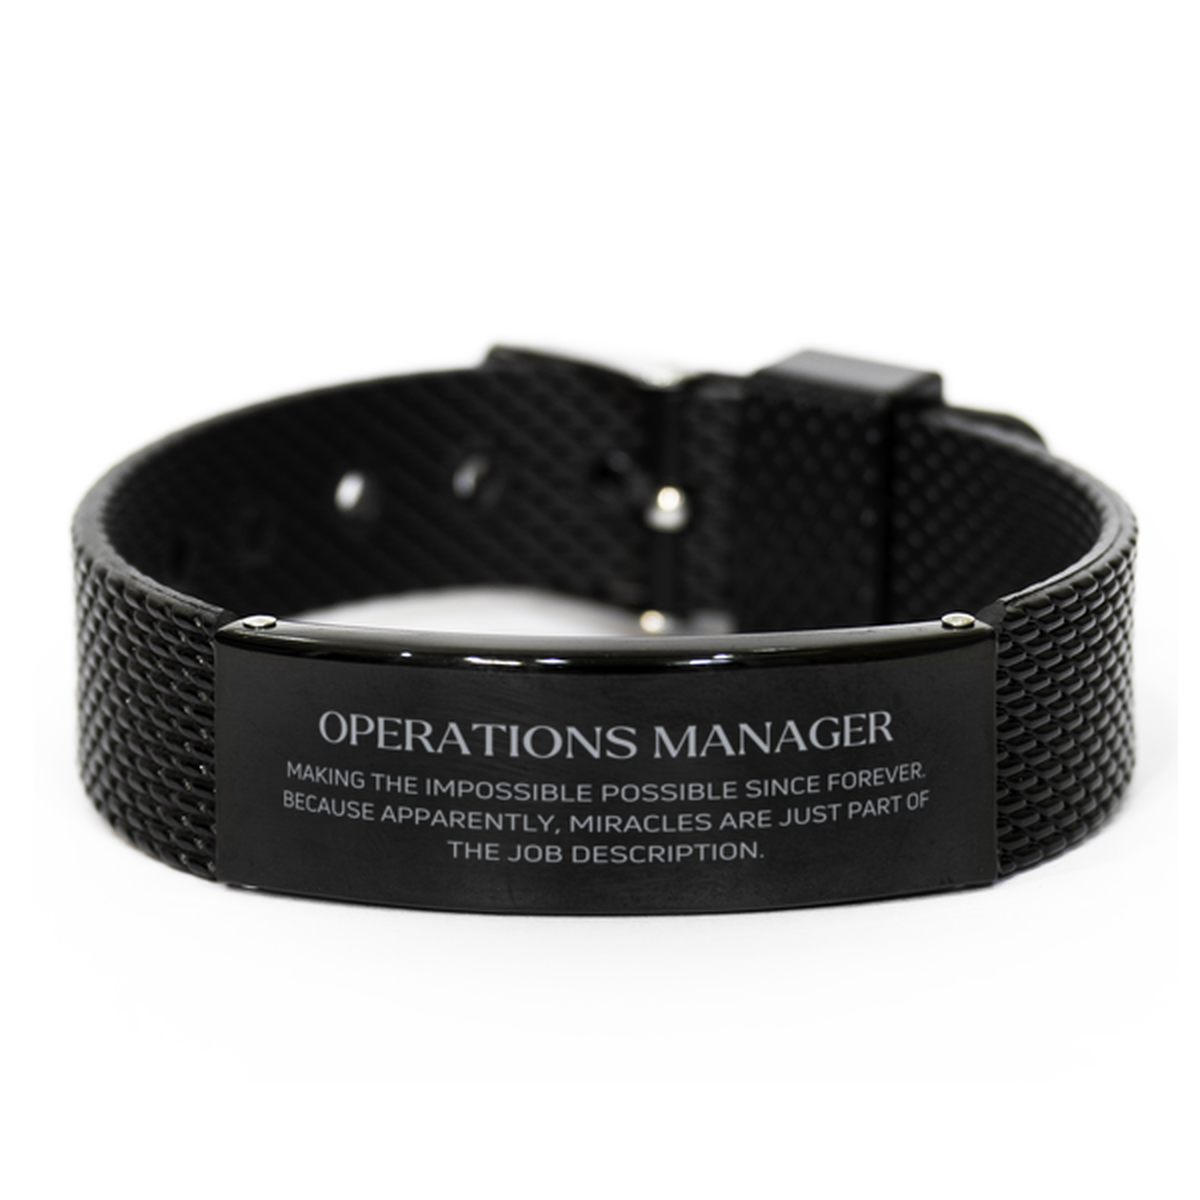 Funny Operations Manager Gifts, Miracles are just part of the job description, Inspirational Birthday Black Shark Mesh Bracelet For Operations Manager, Men, Women, Coworkers, Friends, Boss